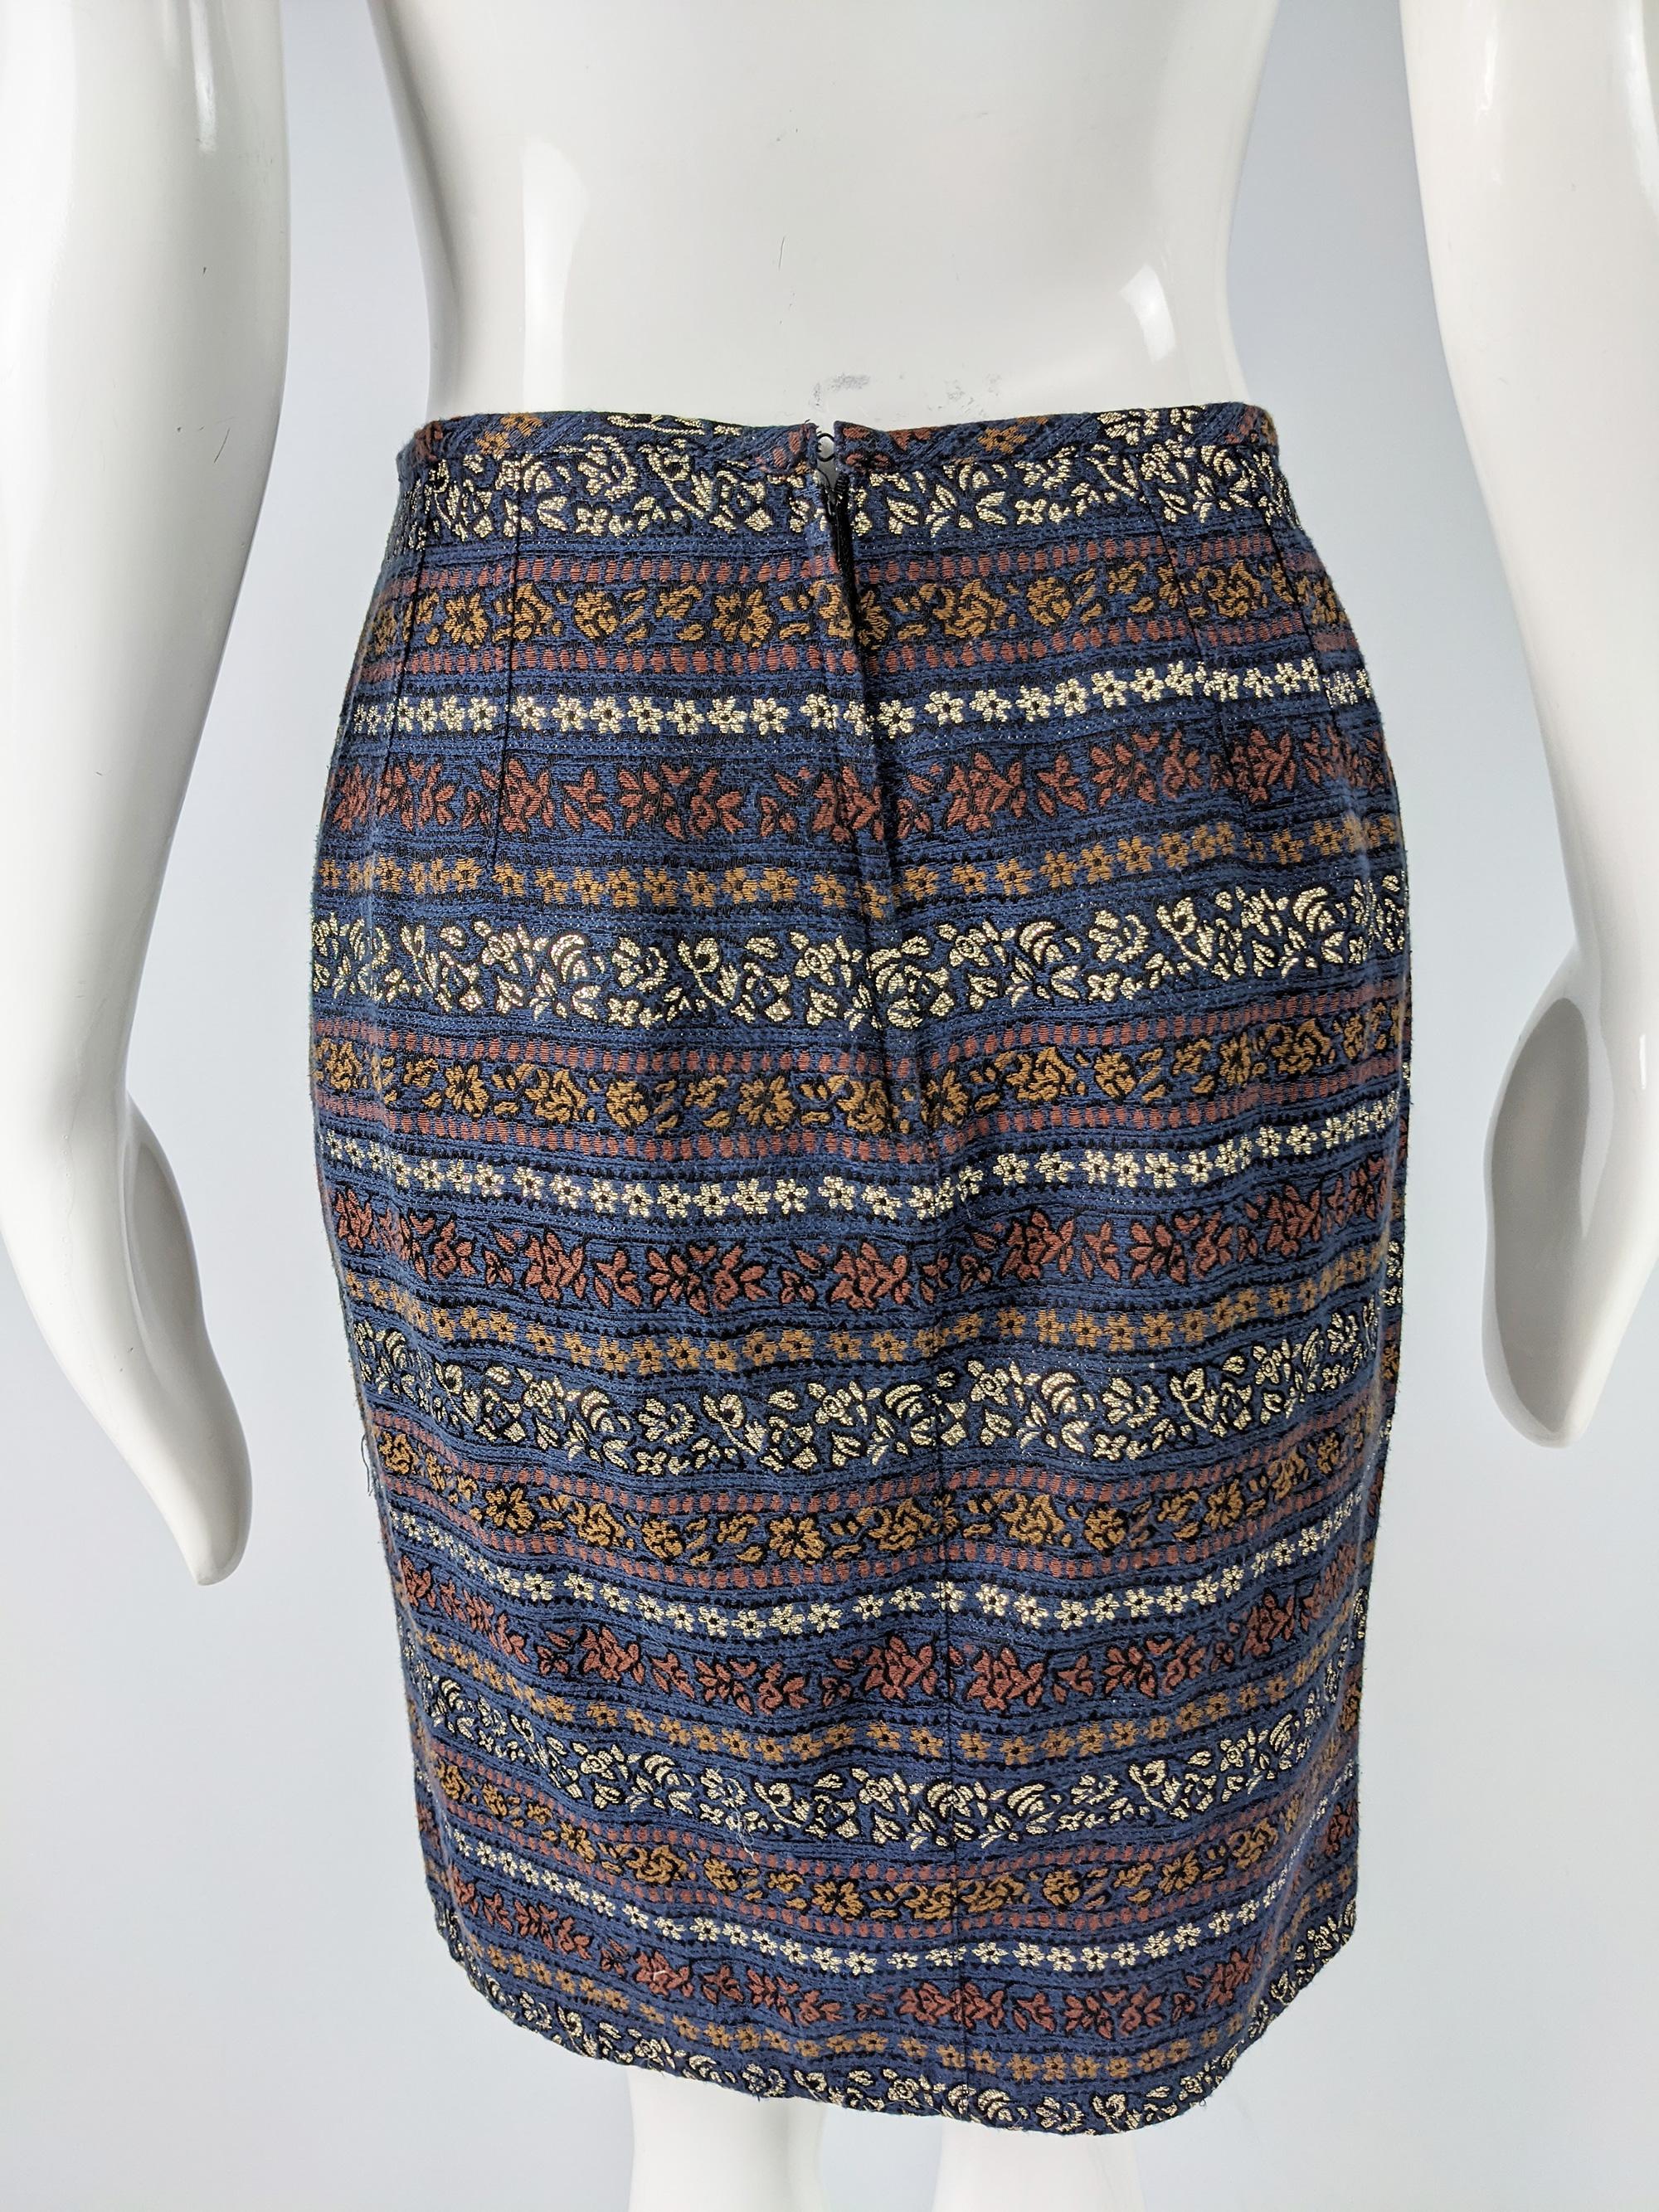 Jean Paul Gaultier Vintage Blue & Gold Brocade Party Day to Evening Skirt, 1980s 3